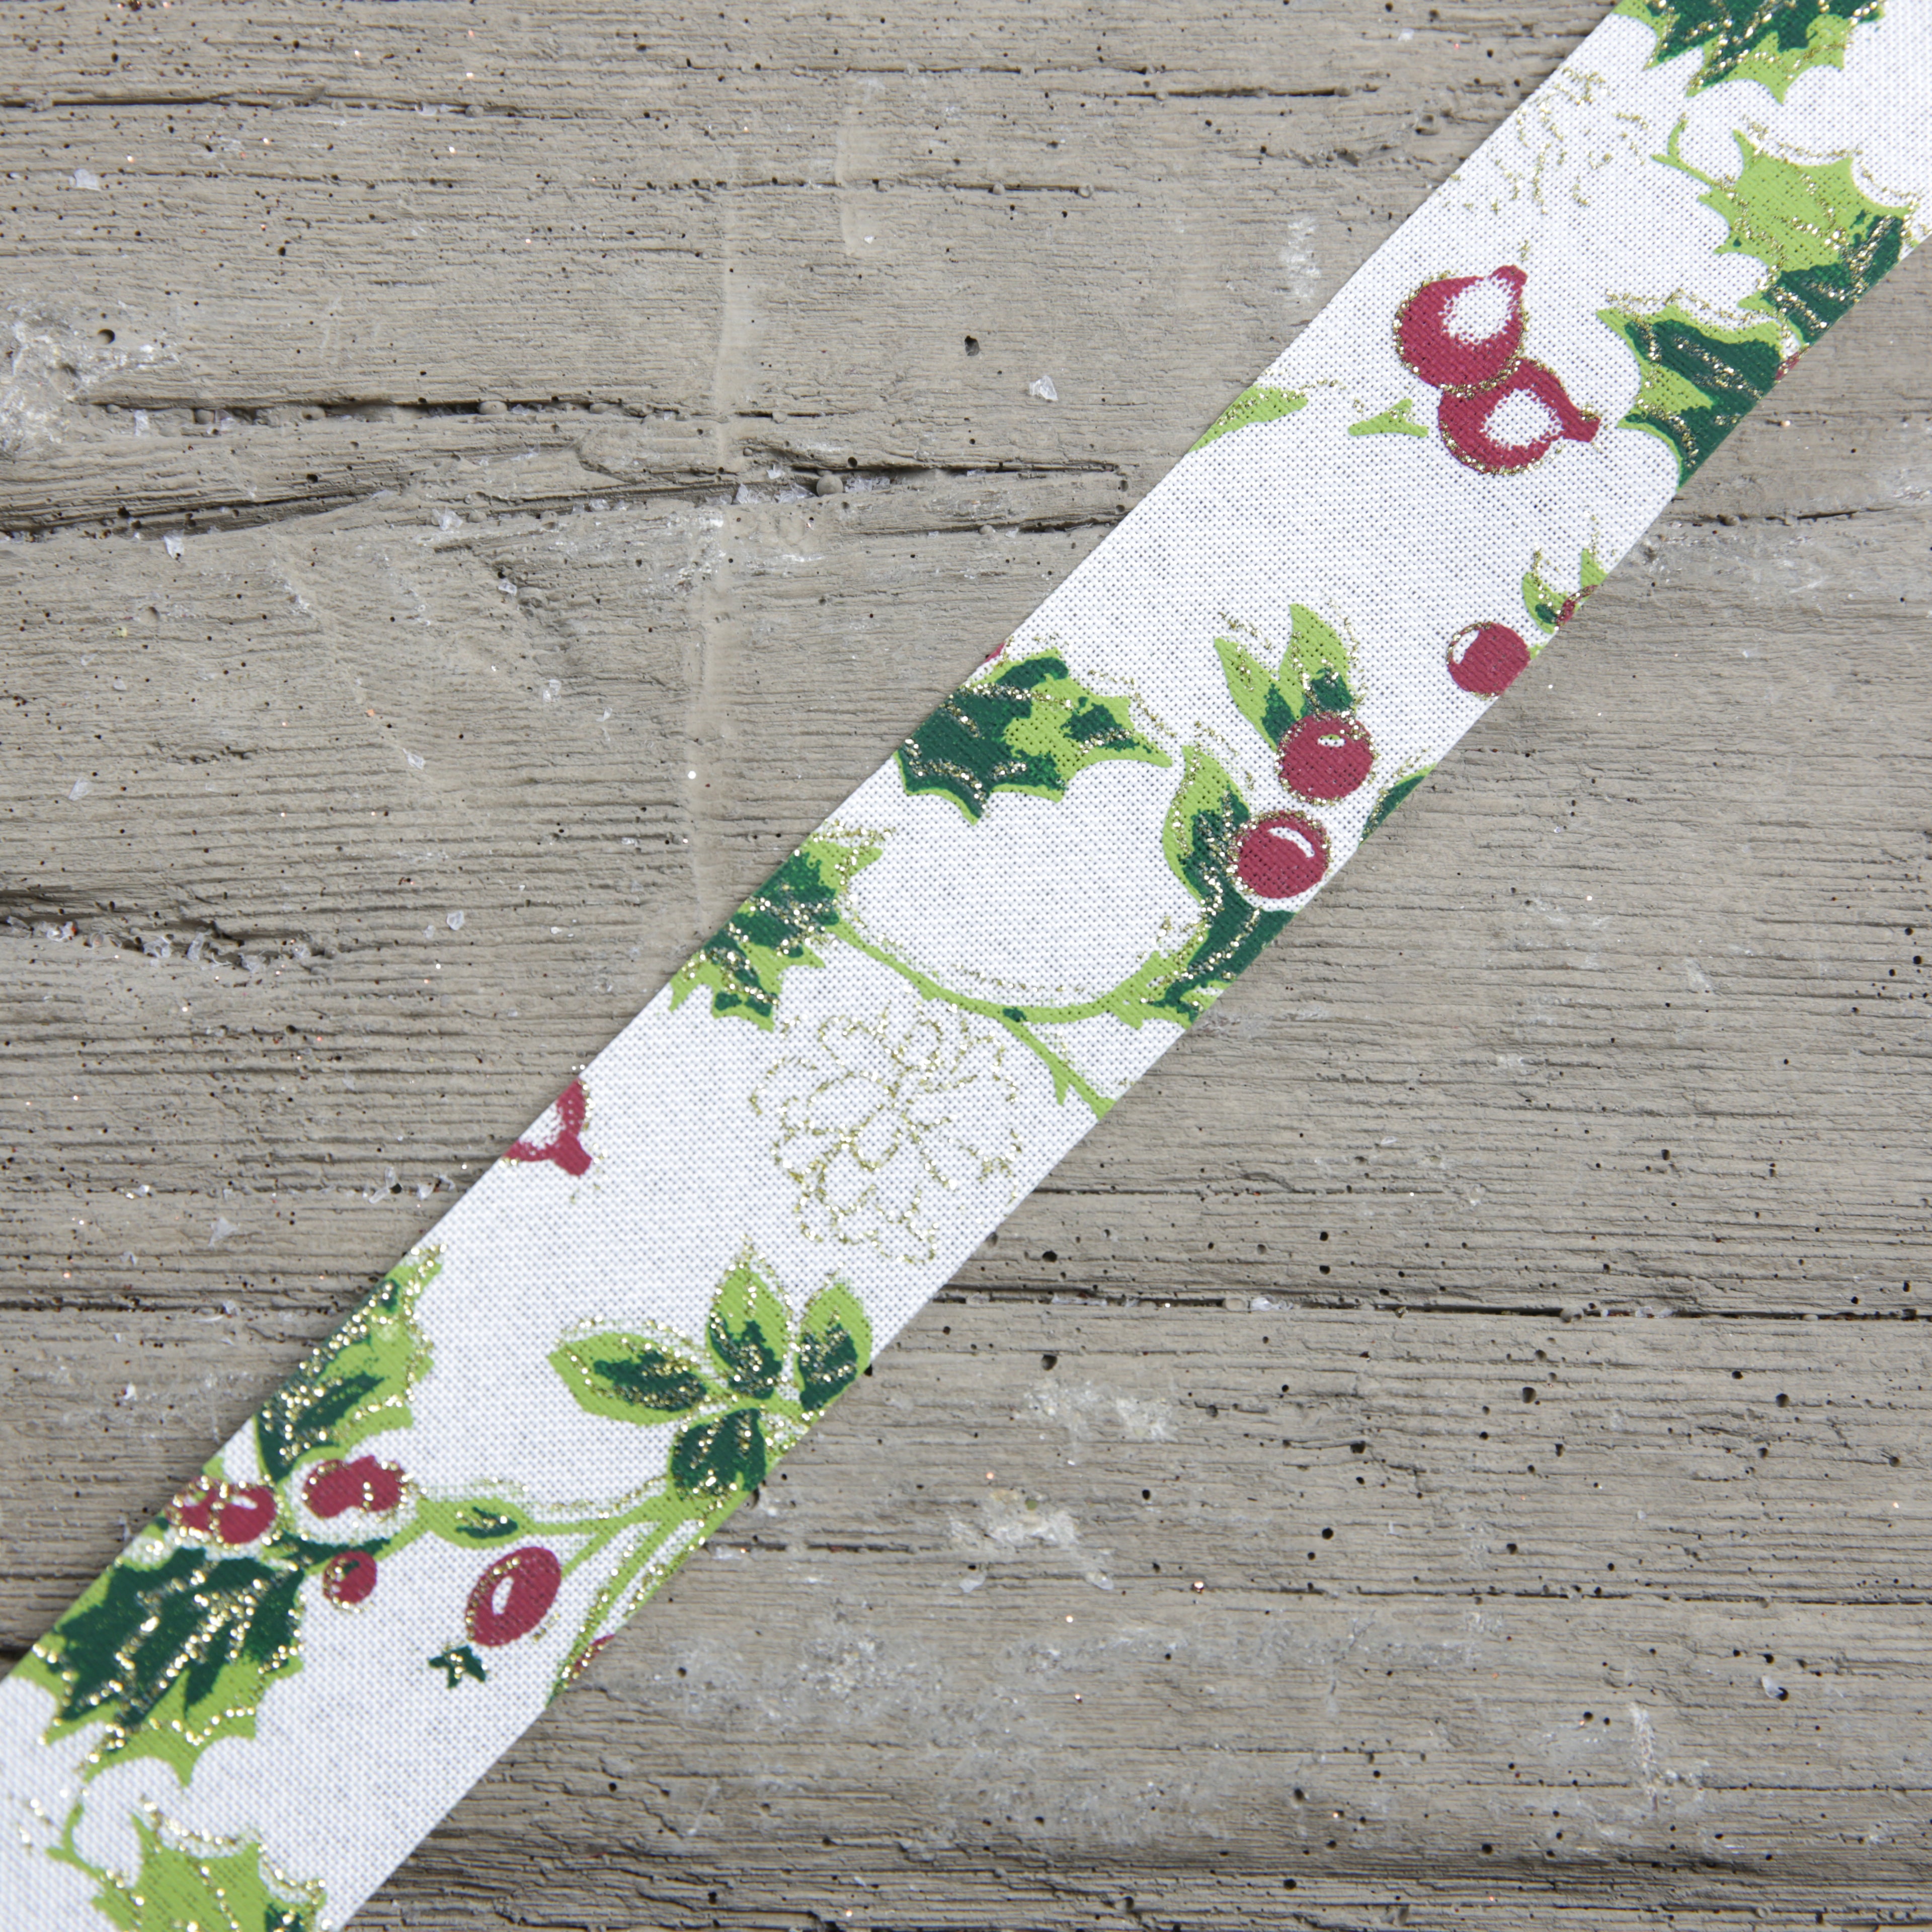 Christmas Berry Print Rustic Ribbon 2.7m White - 2 Sizes Available